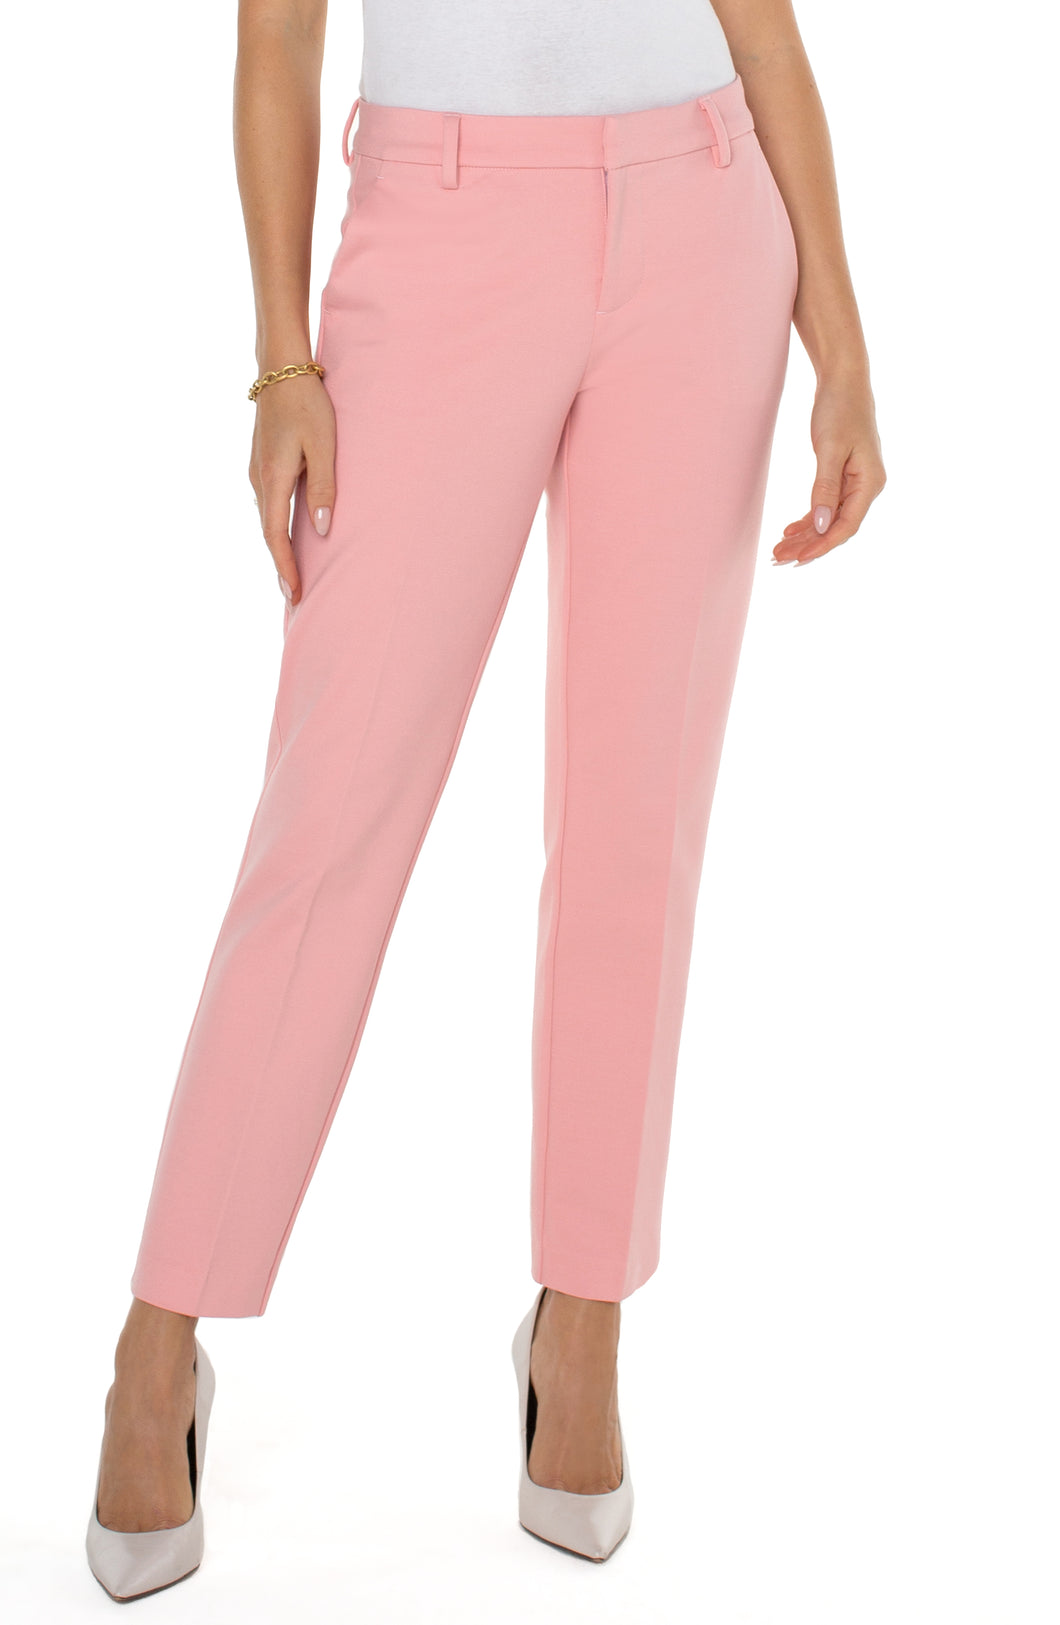 Liverpool's signature Kelsey knit trouser with superb stretch and recovery is now available in pastel colors!  This particular trouser comes in sorbet pink called pink perfection and is a definite attention grabber!    Color - Pink perfection. 29'' Inseam. Mid-rise. Set-in waistband with belt loops. Zip-fly with hidden hook and eye closure.